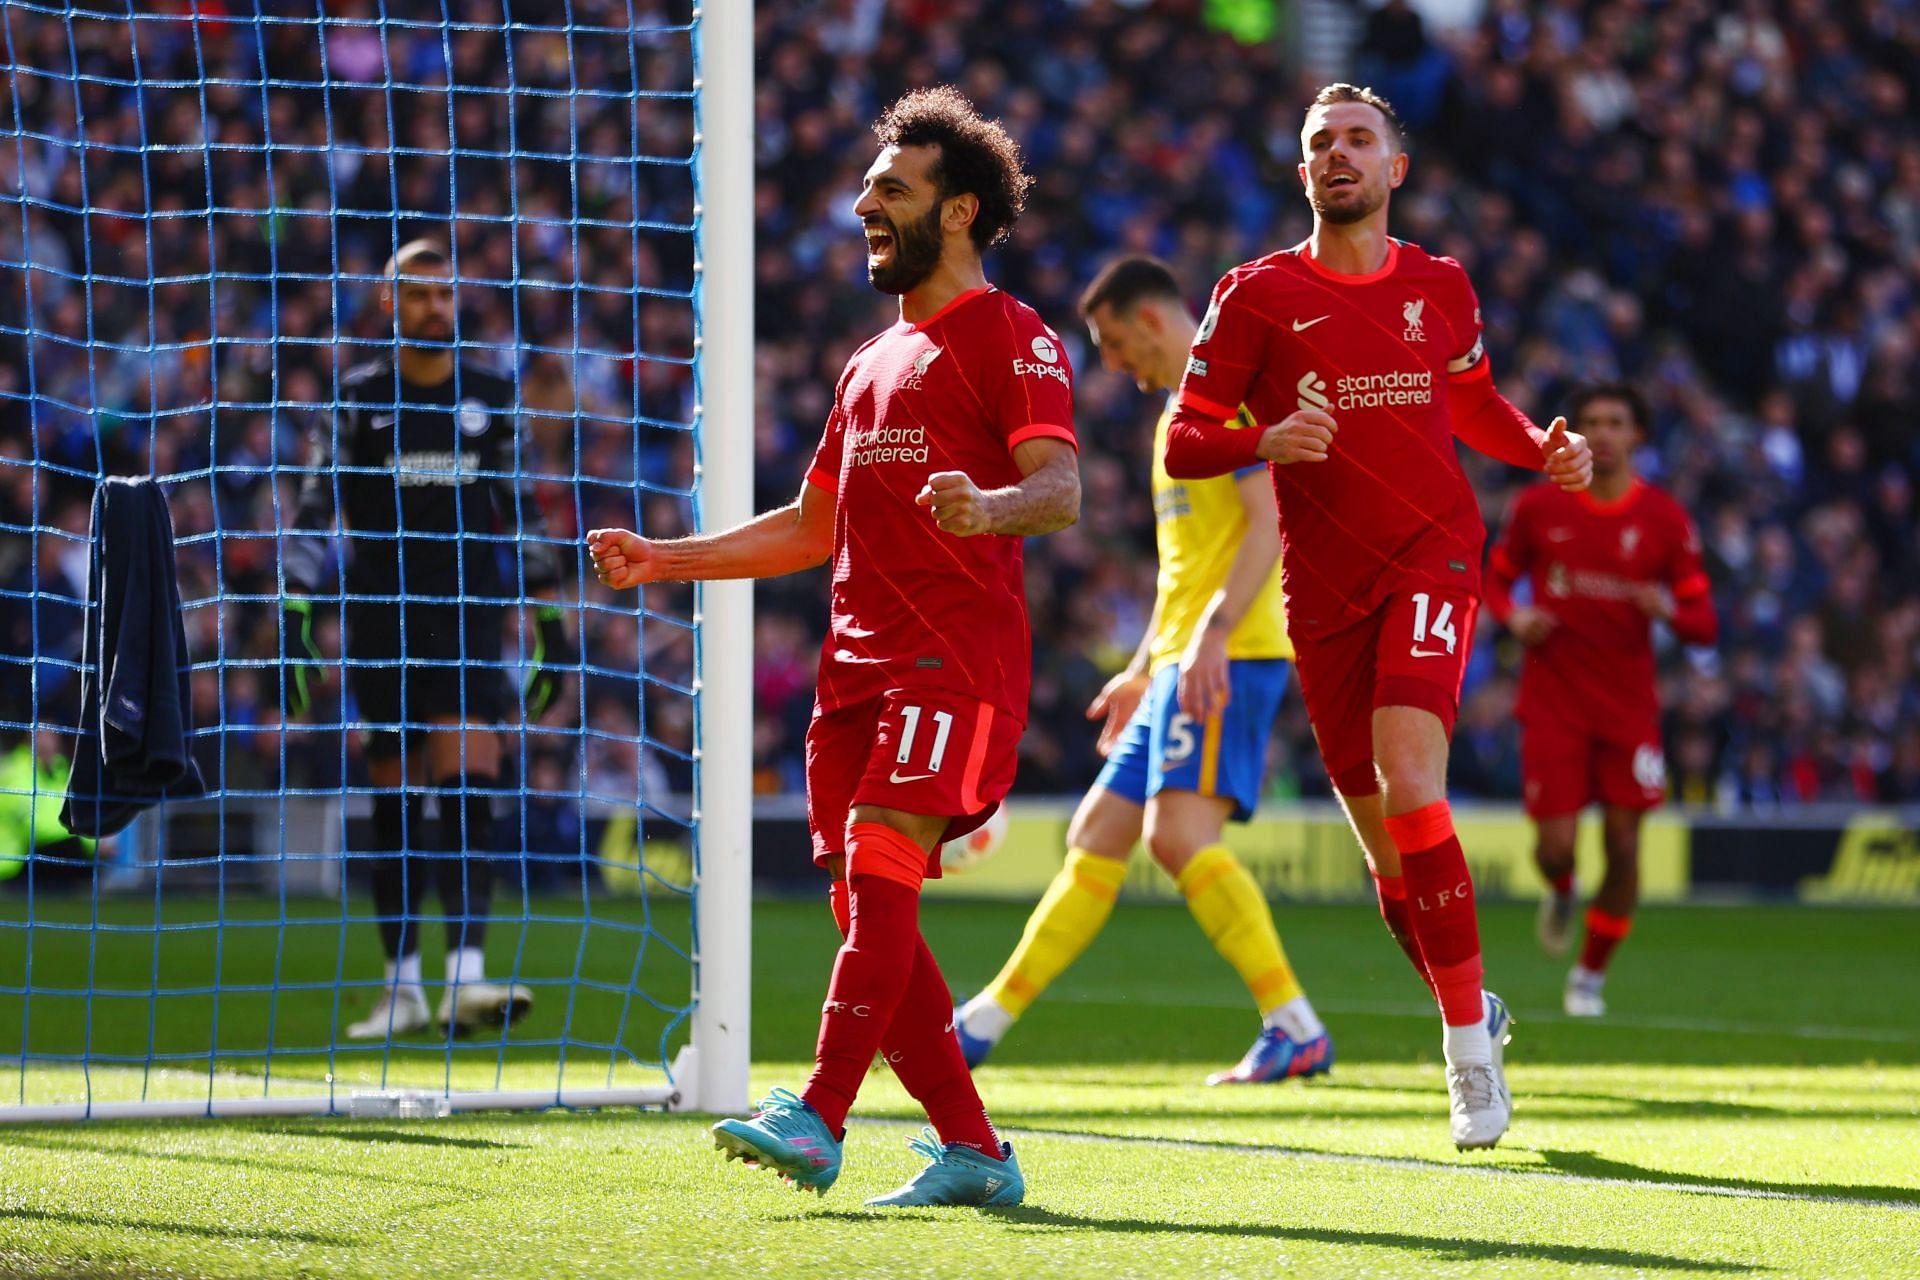 Mo Salah scored for the Reds over the weekend